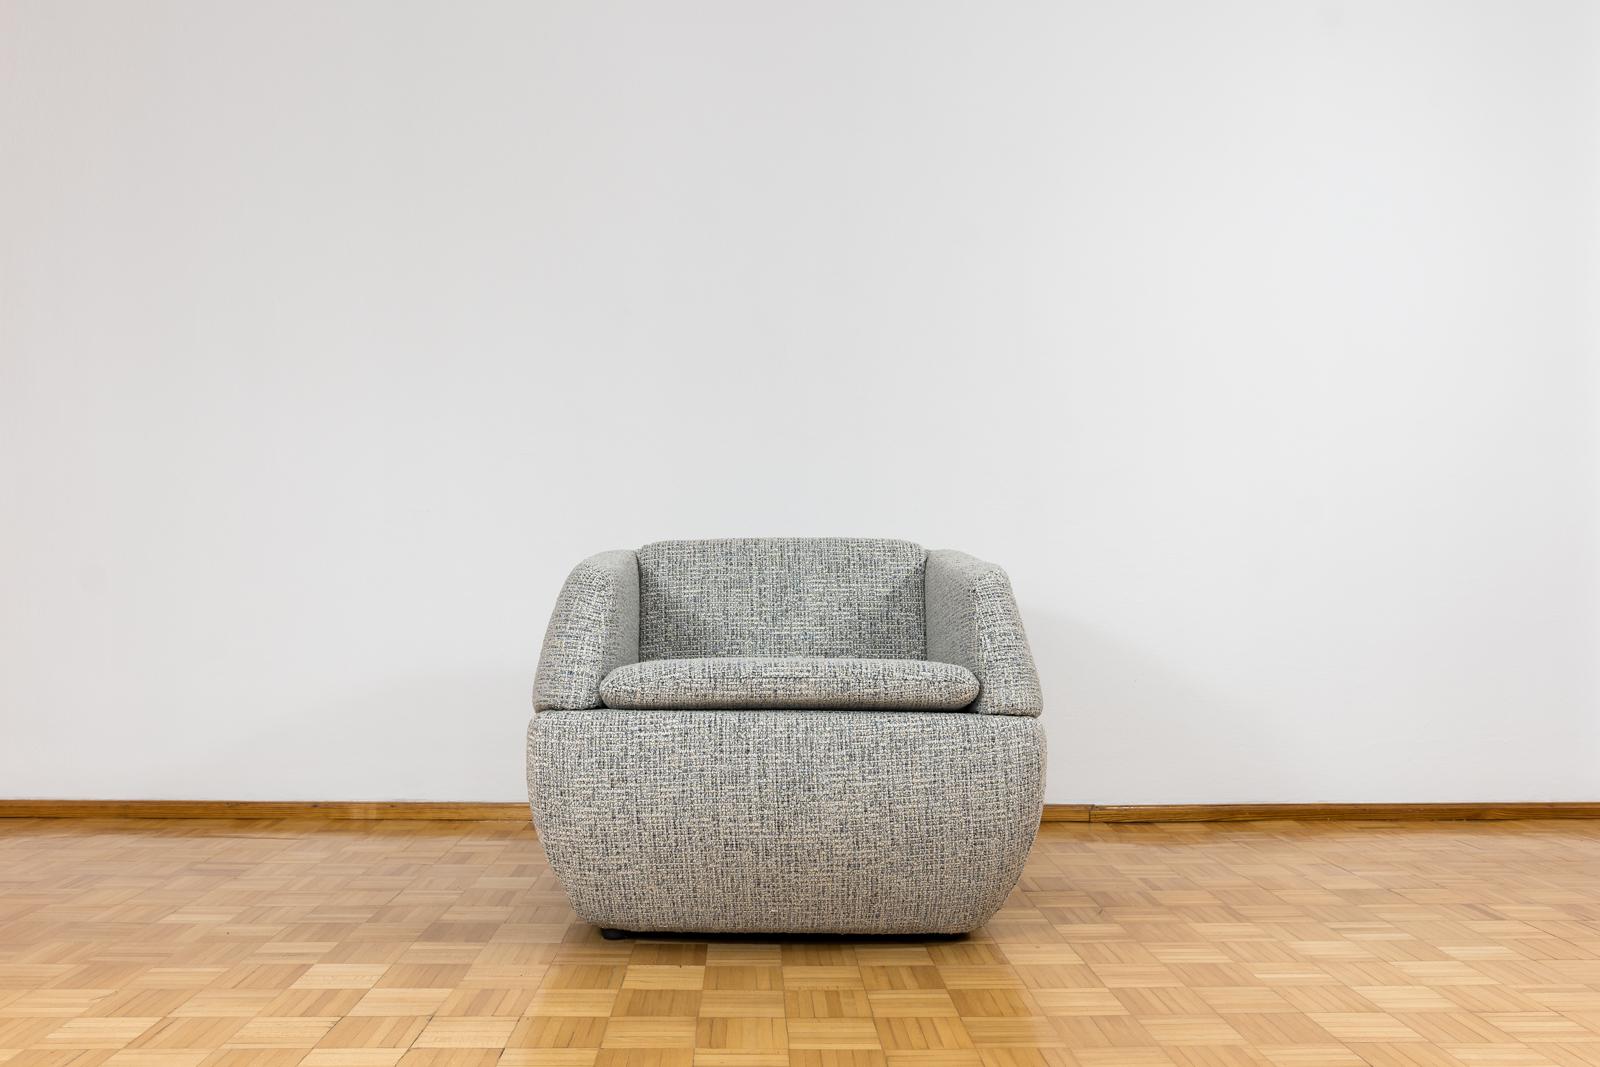 Customizable Space Age Lounge Chair From Lubuskie Fabryki Mebli, 1970s
Reupholstered in grey-white-black soft textured fabric
The lounge chair has storage under the seat.
We offer fabric customization upon request.